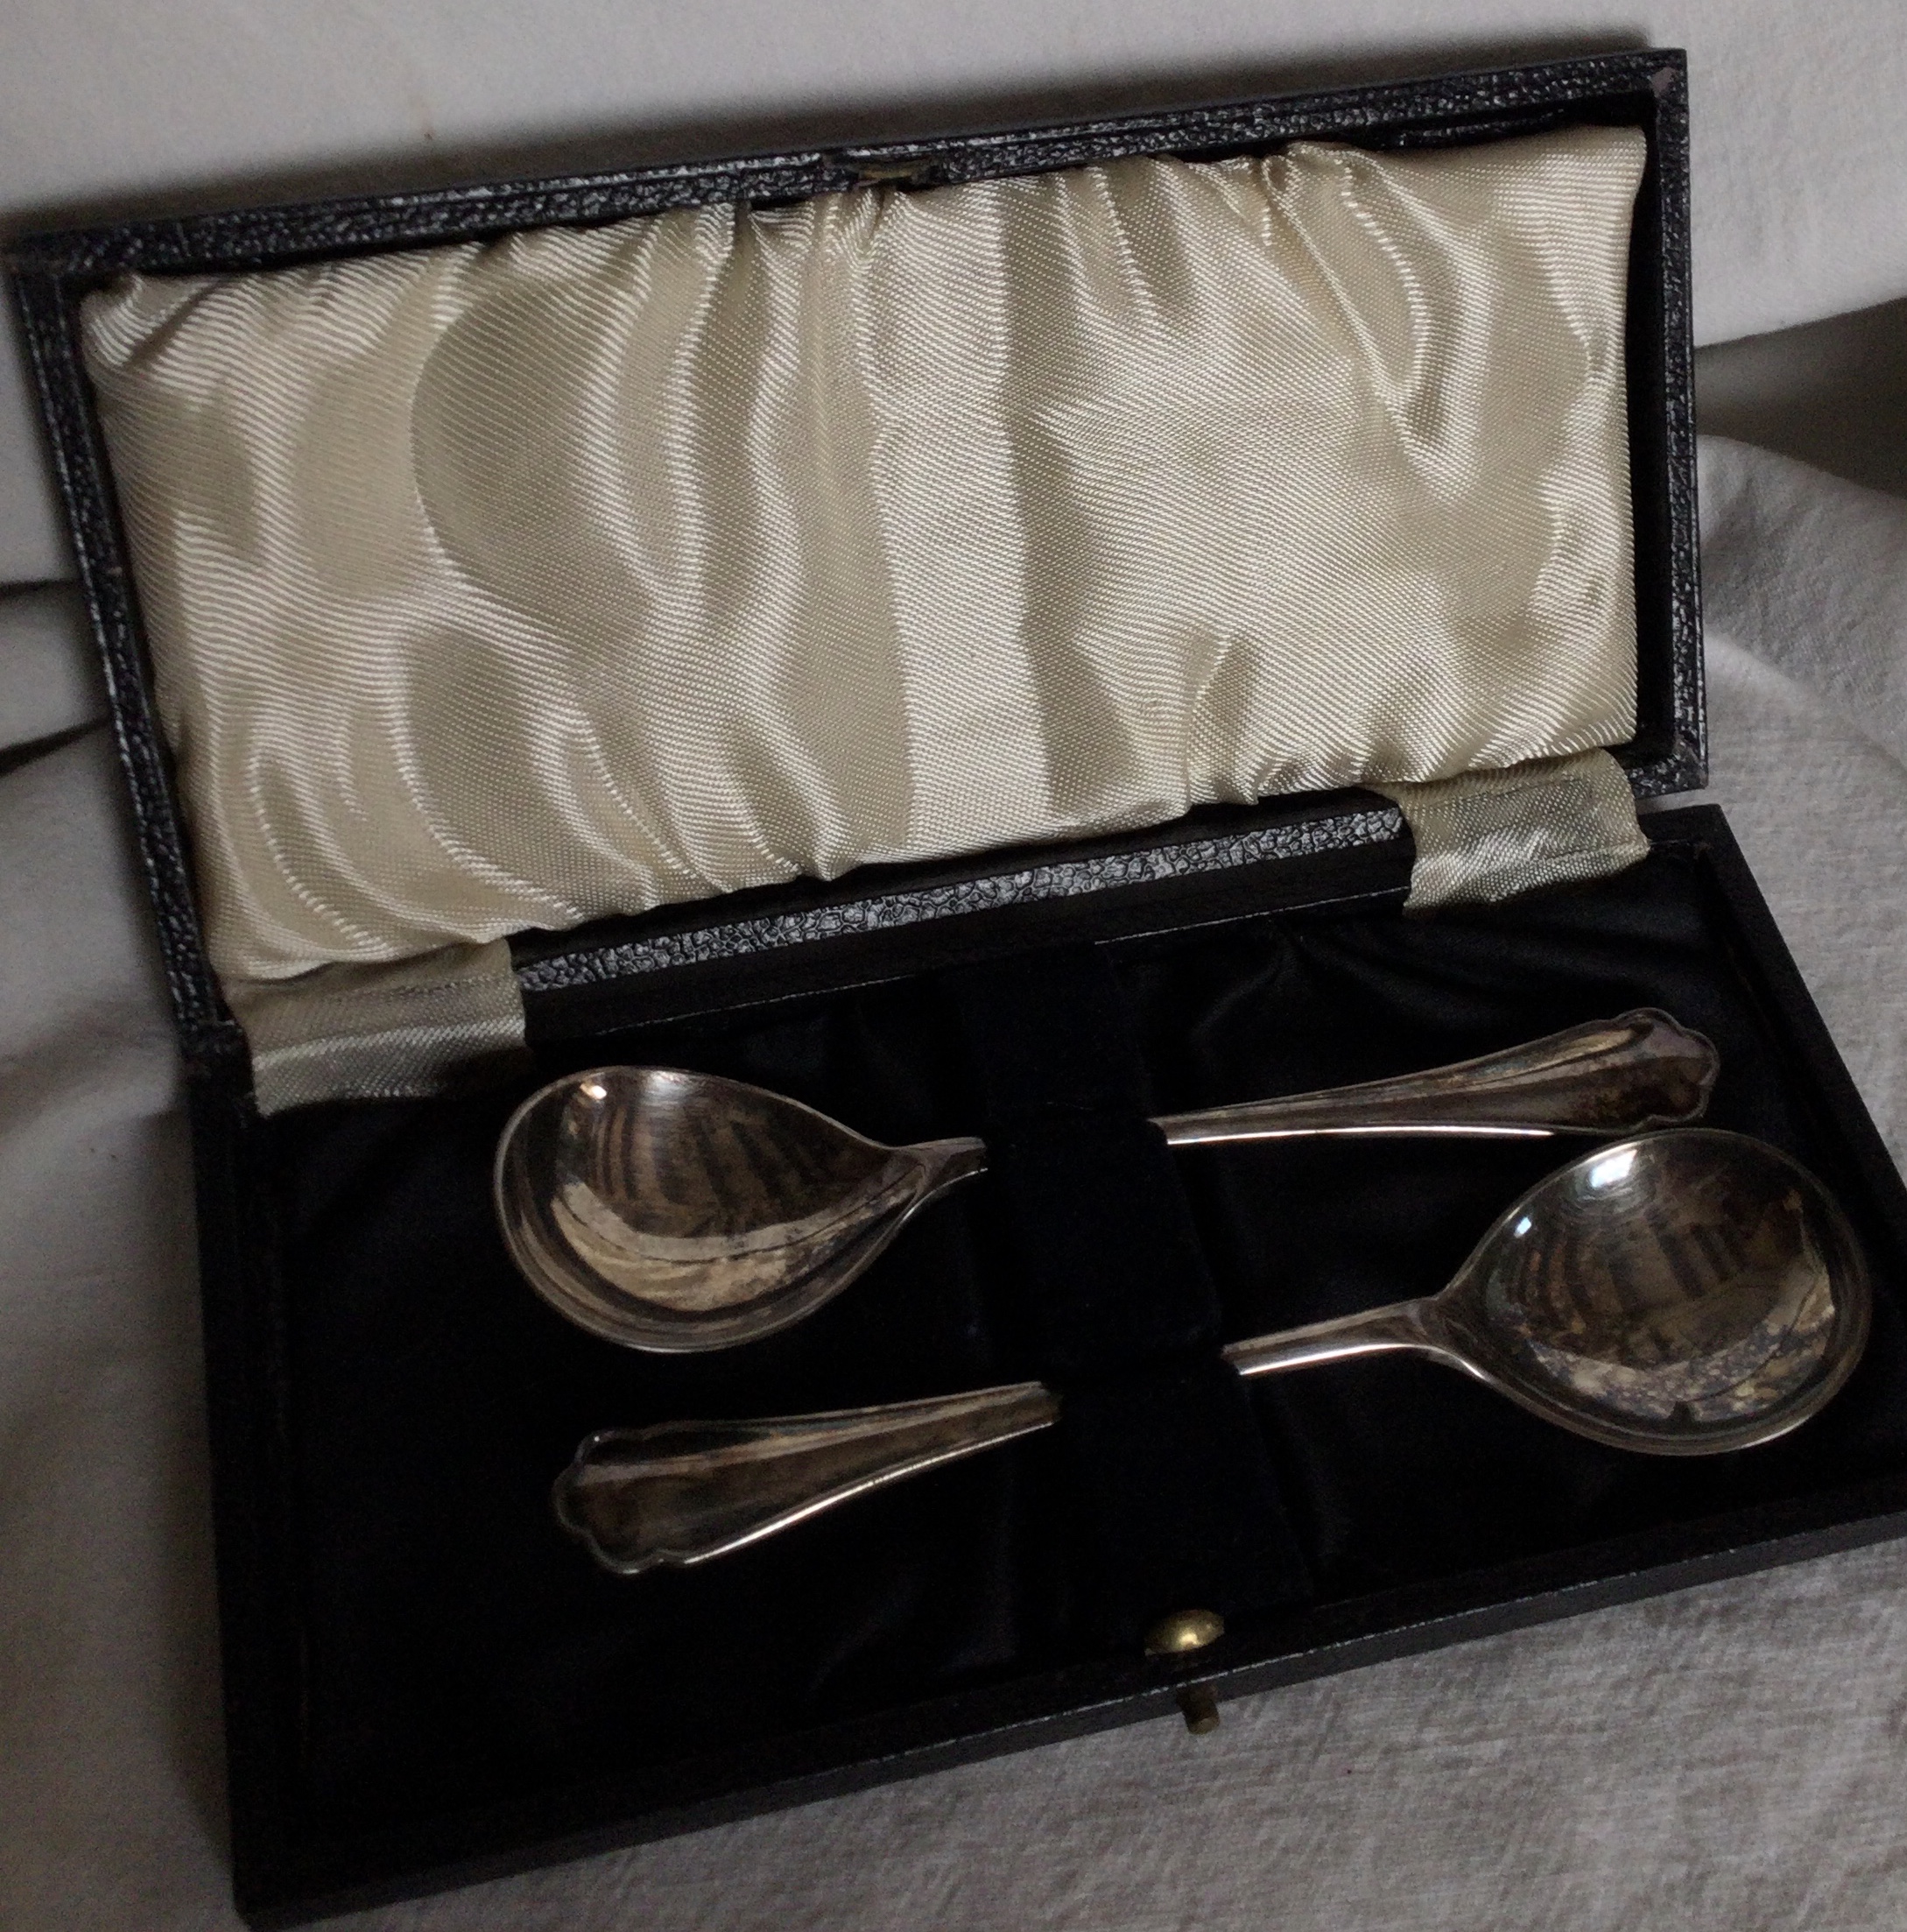 Silver spoons in case - Image 2 of 7